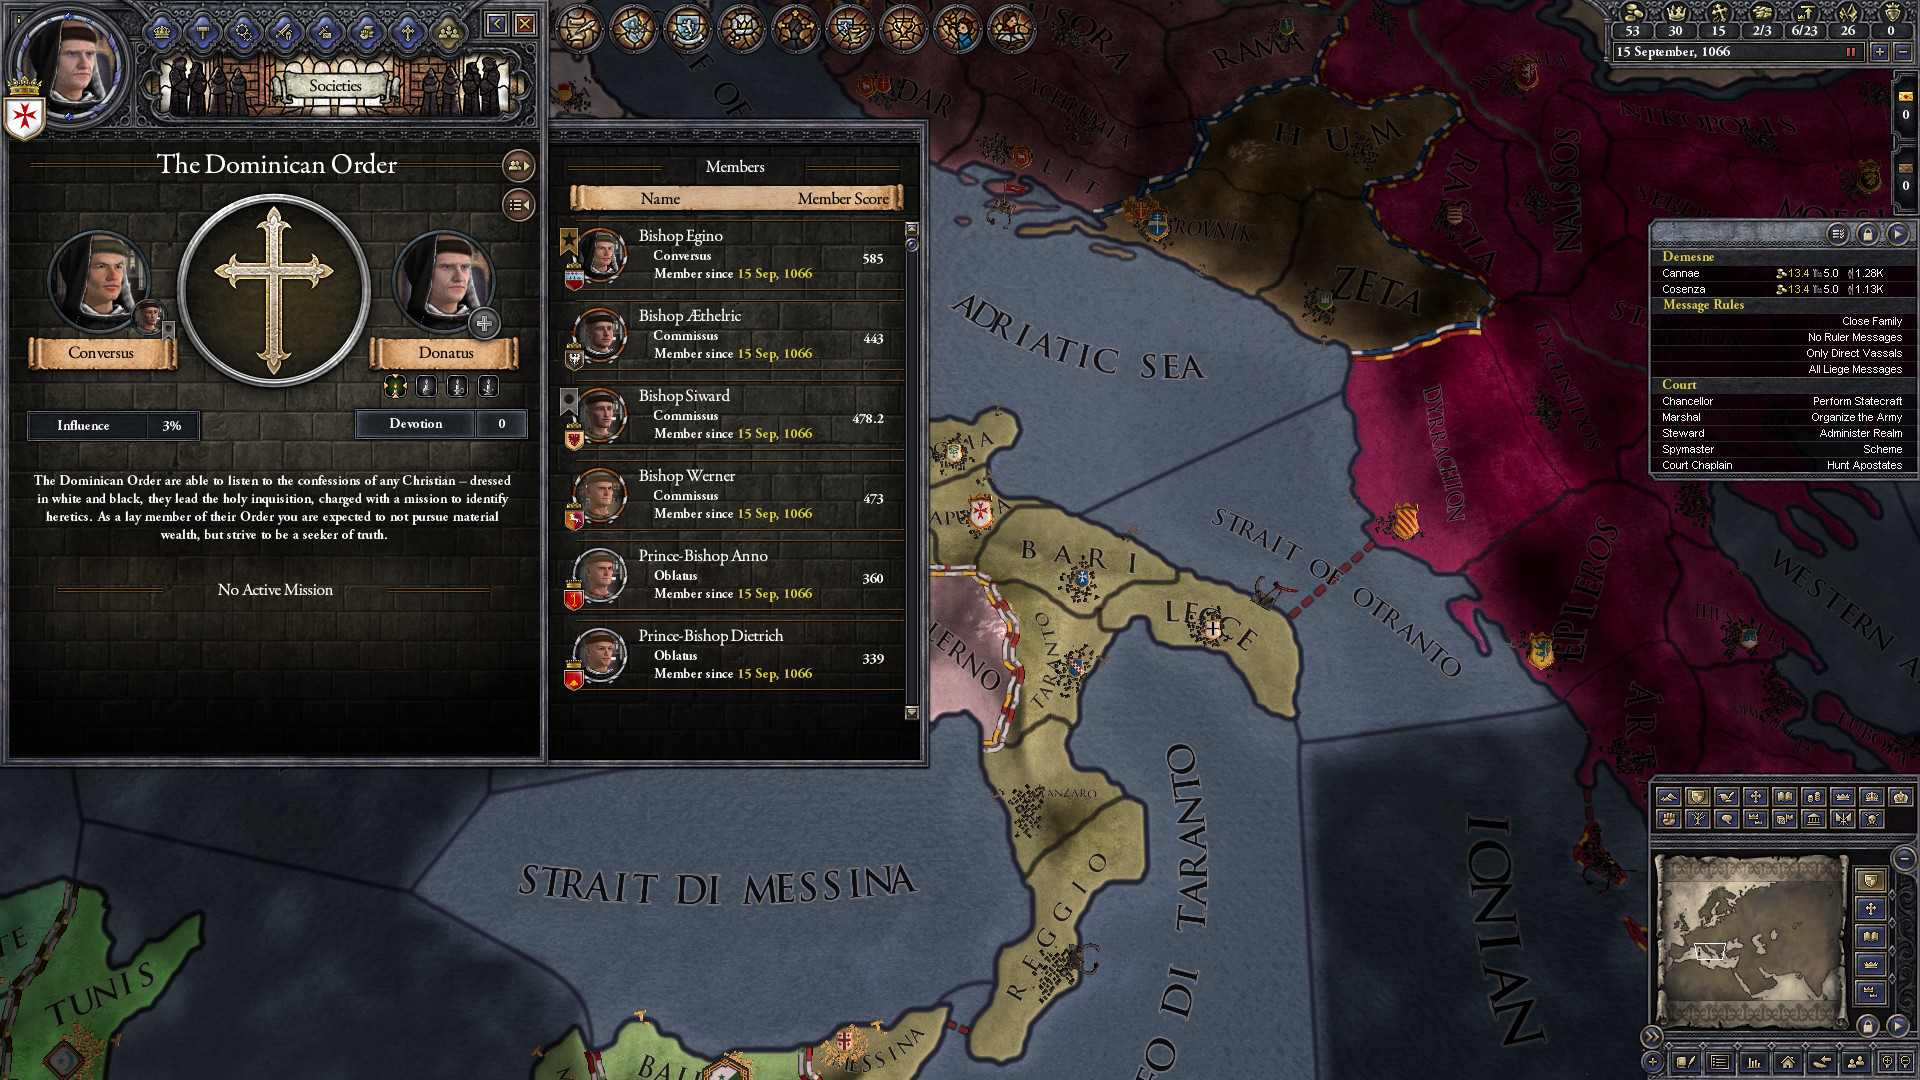 Expansion - Crusader Kings II: Monks and Mystics Featured Screenshot #1